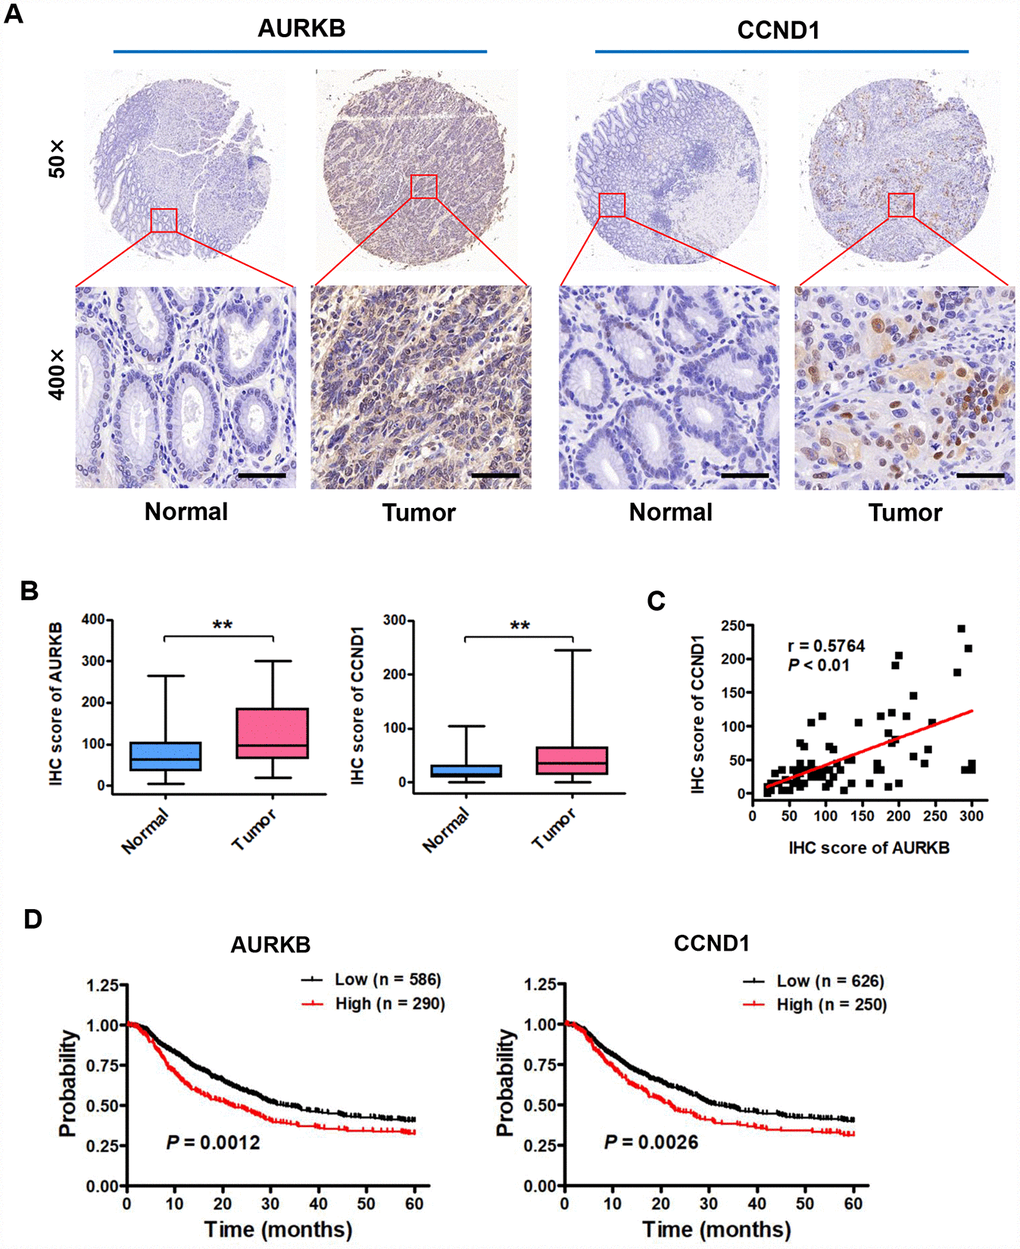 Expression of AURKB and CCND1 is upregulated in gastric cancer tissues, and these expression levels are associated with poor prognosis in gastric cancer patients. (A) Representative images of immunohistochemical (IHC) staining of AURKB and CCND1 in human gastric cancer tissues and matched normal tissues (n = 80). (B) Total IHC score for AURKB and CCND1 in human gastric cancer tissues (Tumor) and matched normal tissues (Normal). **P C) The correlation between AURKB and CCND1 expression was evaluated using Pearson correlation analysis (n = 80; r = 0.5764; P D) Analysis of data from the Kaplan-Meier plotter database suggested that high expression levels of AURKB (left panel; P = 0.0012) and CCND1 (right panel; P = 0.0026) are negatively correlated with 5-year overall survival in gastric cancer patients.